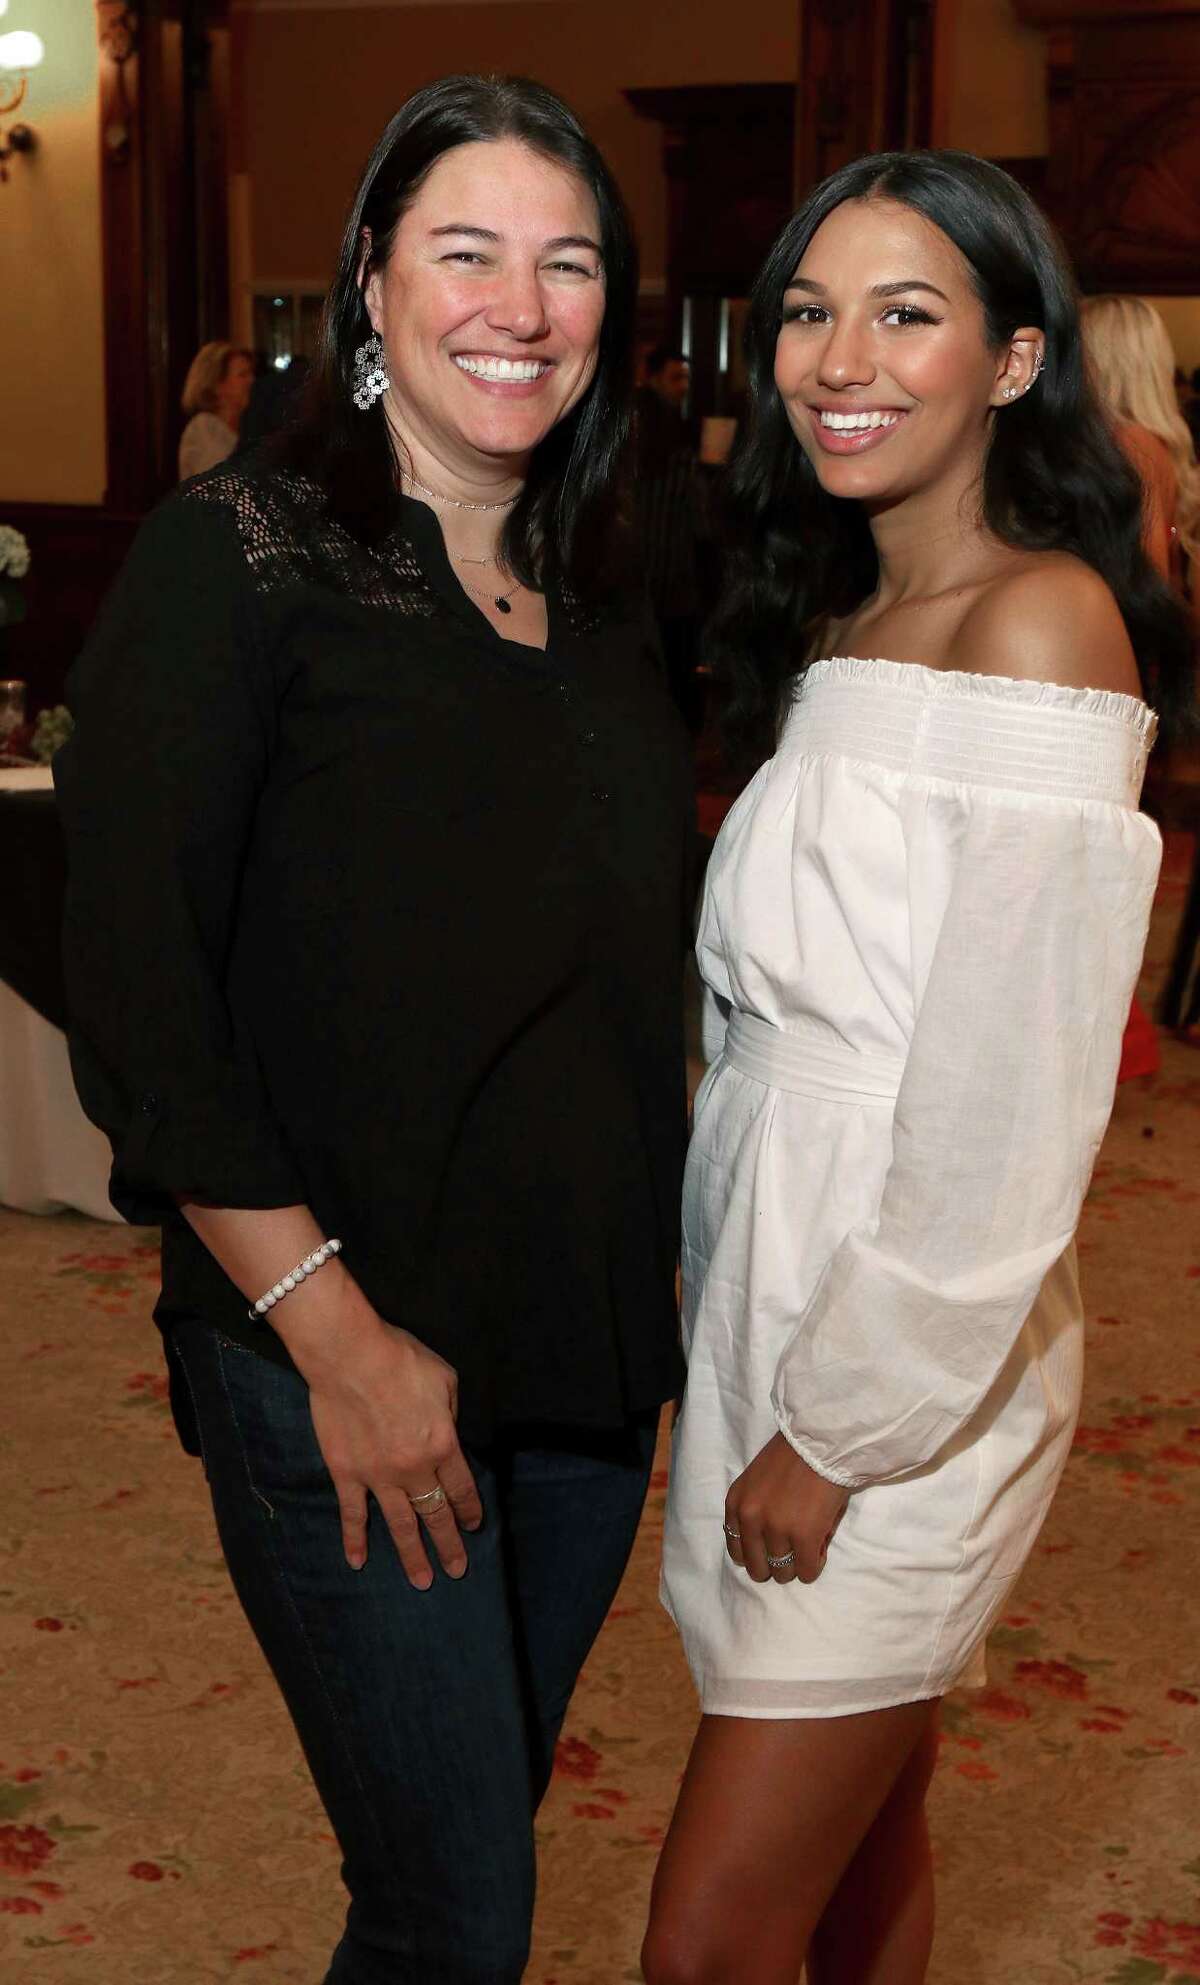 Saratoga Springs, NY - April 6, 2018 - (Photo by Joe Putrock/Special to the Times Union) - Christina Primero(left) and her daughter Schuyler Turmon(right) during the Alexis Aida Industrial Romance Fashion Show at the Canfield Casiono in Saratoga Springs with partial proceeds to benefit the Juvenile Diabetes Research Foundation.